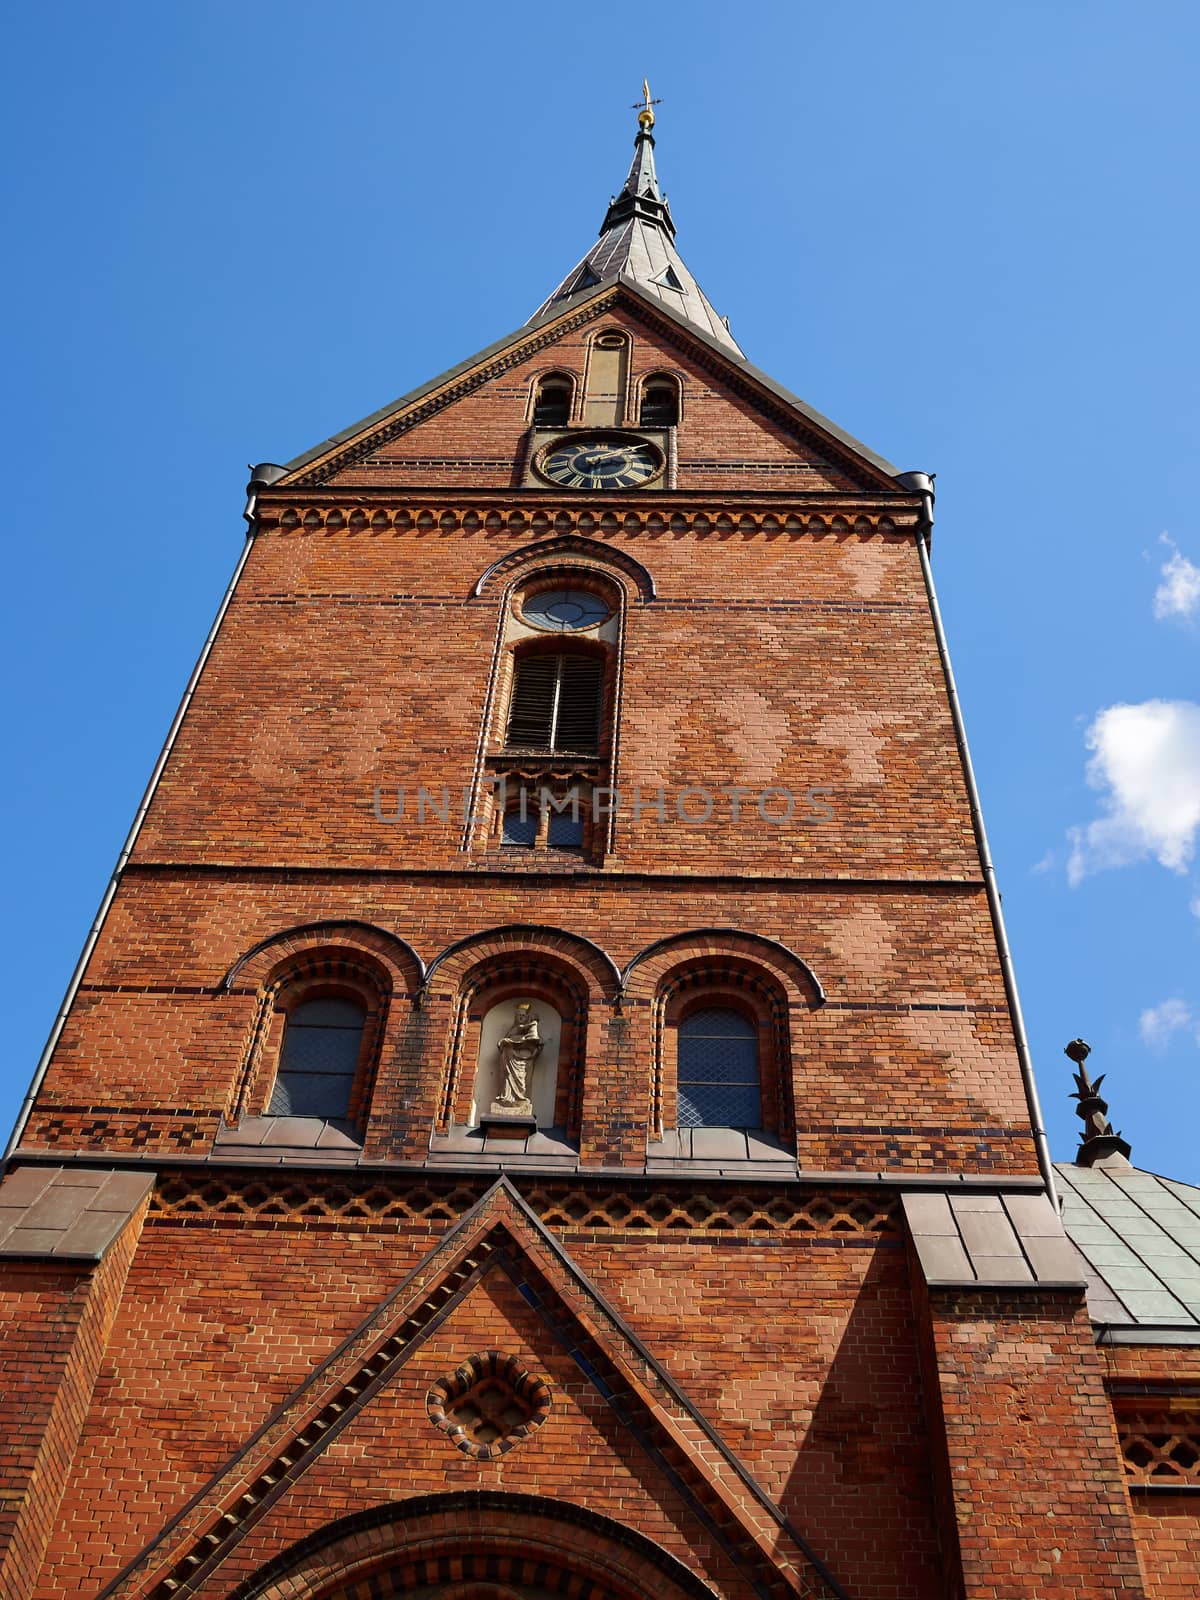 Famous St. Mary church in Flensburg Germany by Ronyzmbow